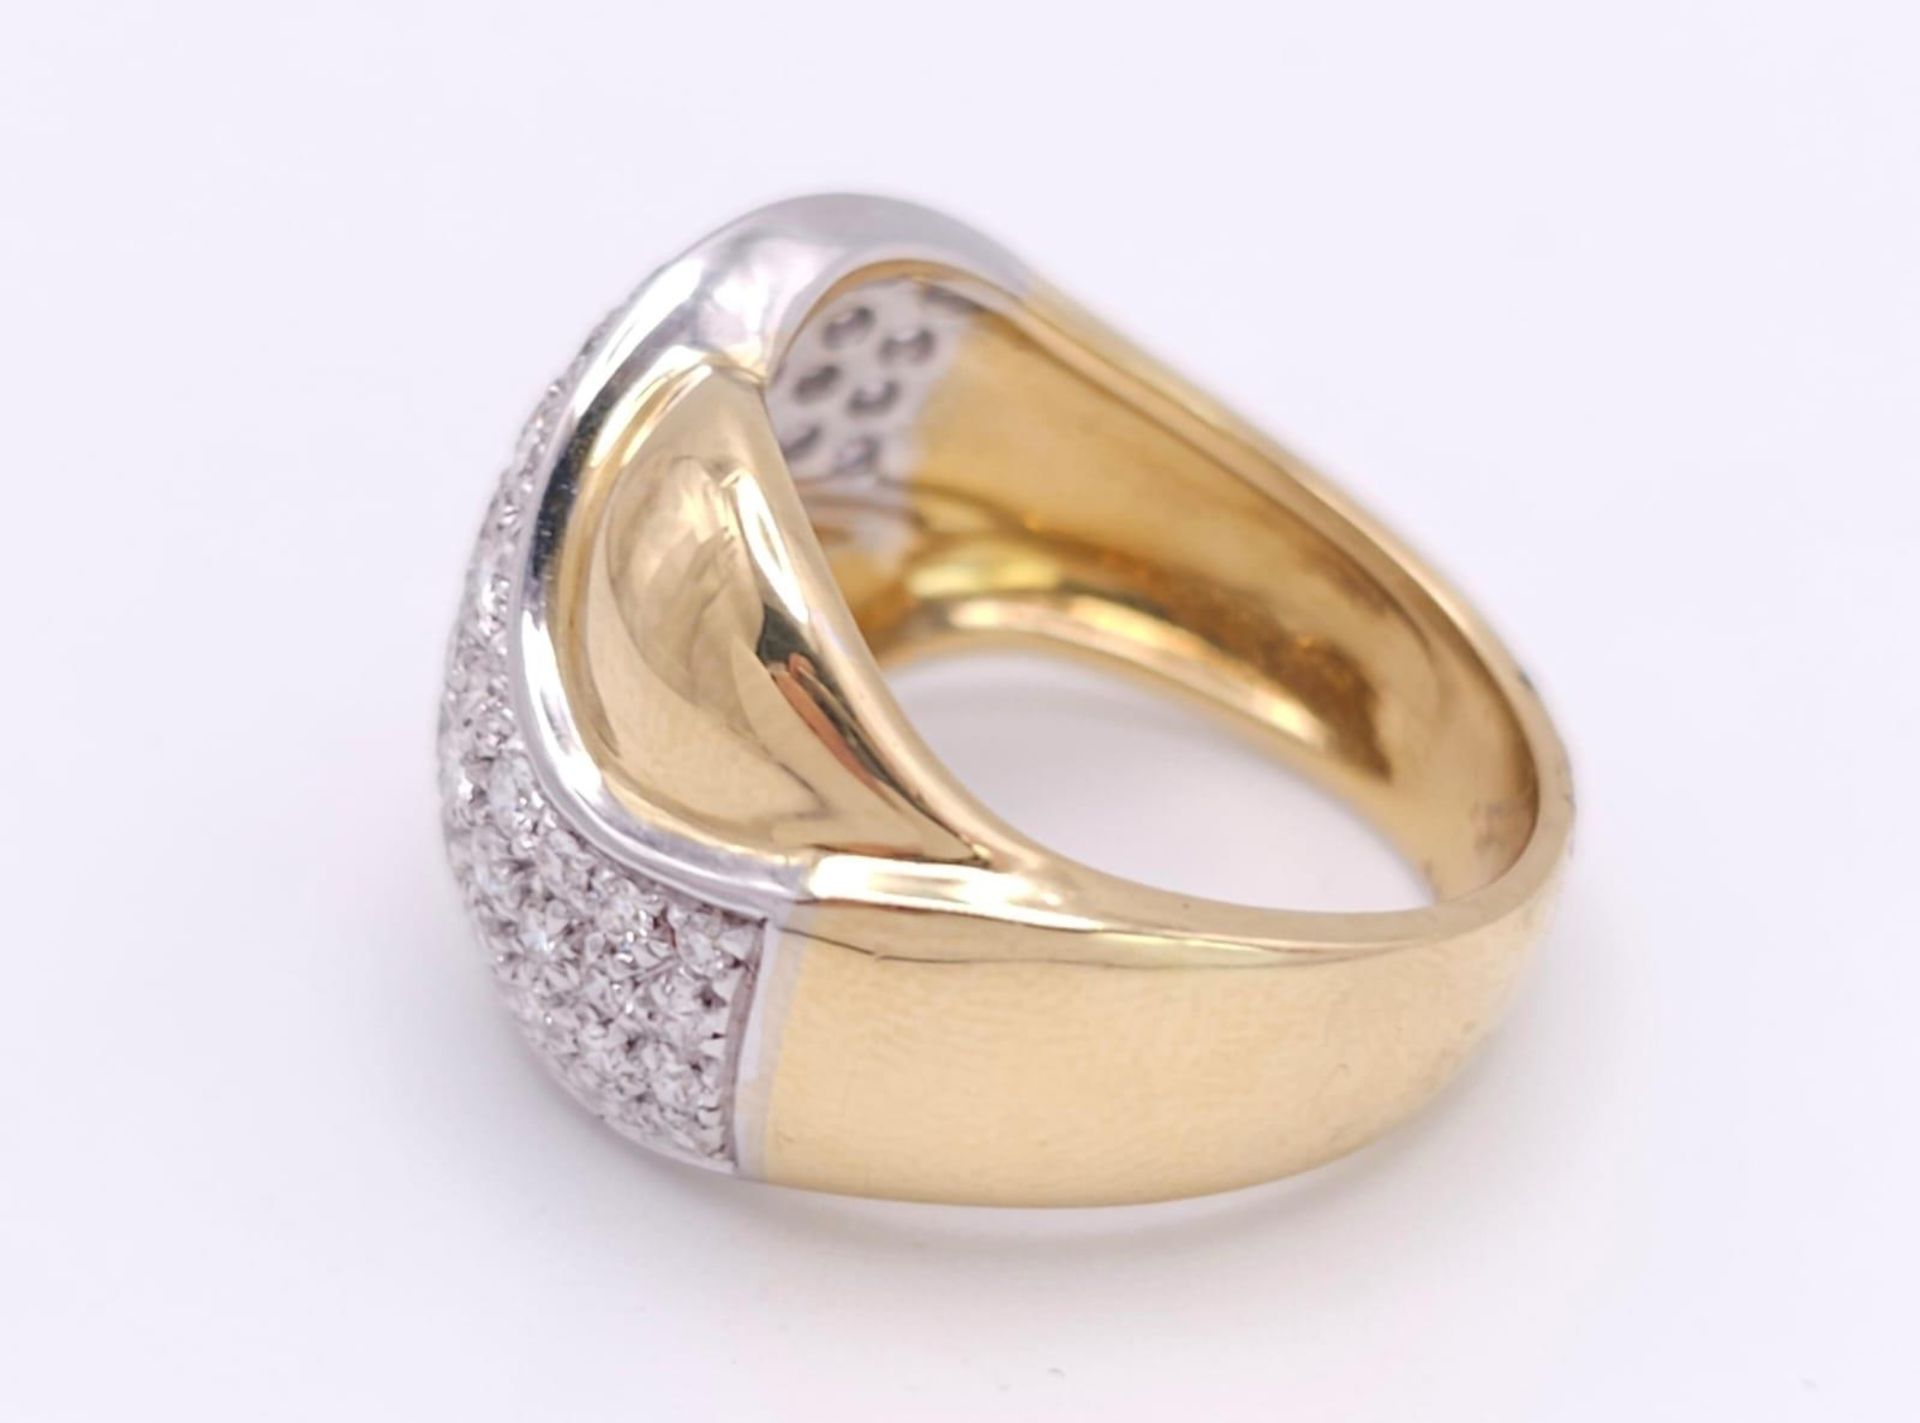 An 18K Yellow Gold Diamond Set Fancy Ring. 1.40ctw, Size N, 10.4g total weight. Ref: 2753 - Image 4 of 7